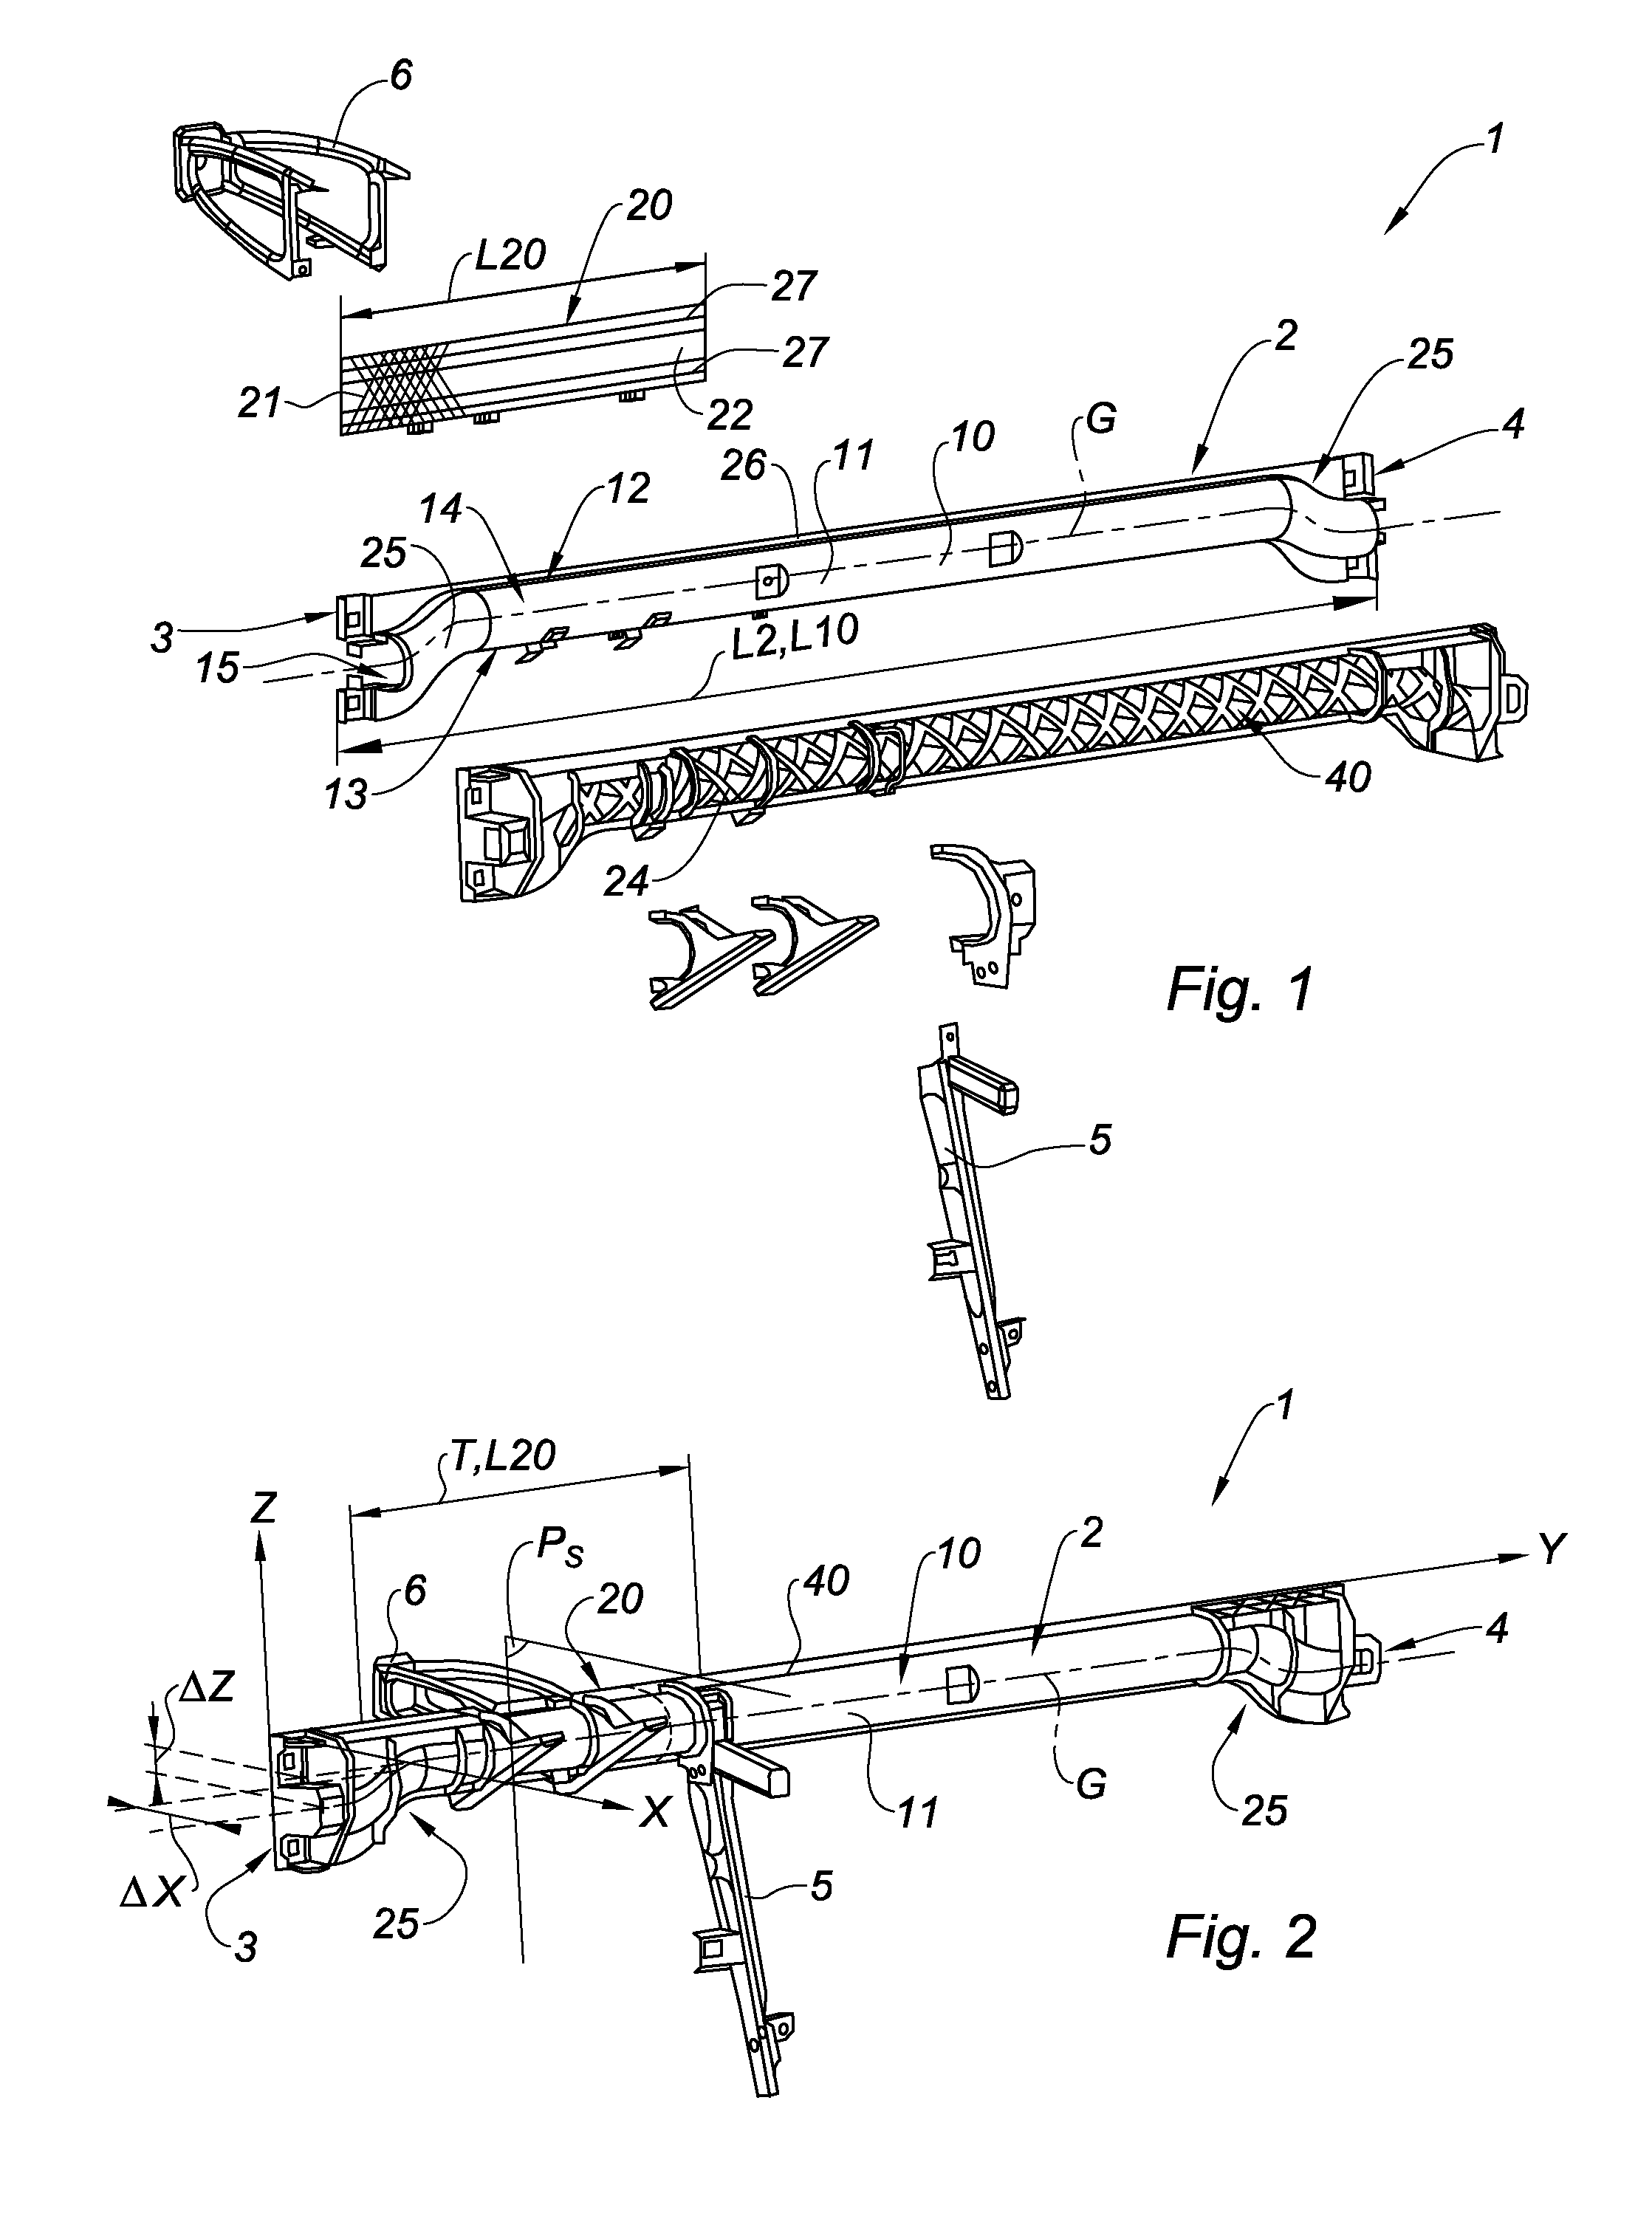 Crossmember for a Vehicle Dashboard Provided with a Reinforcing Back Brace Made of a Fibrous Composite